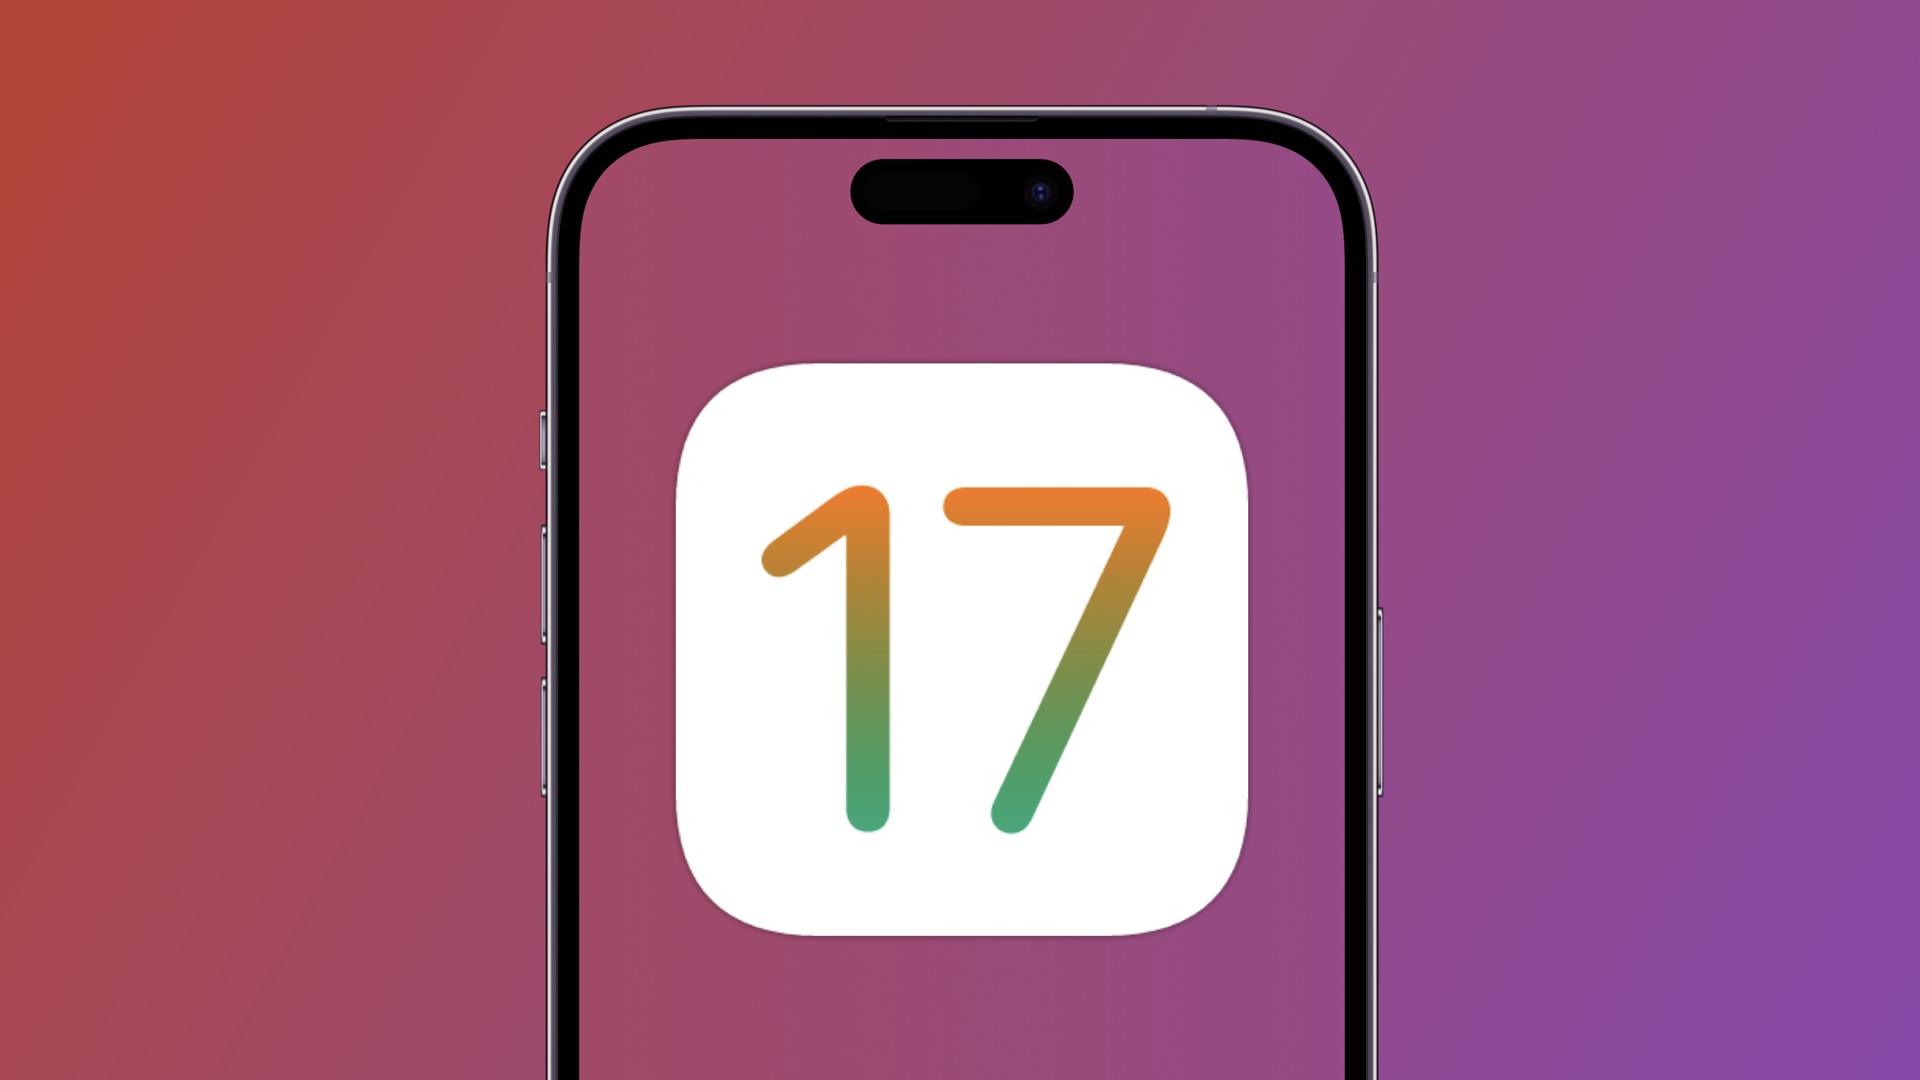 iOS 17 to Bring Improved Lock Screen, Apple Music, & App Library Features